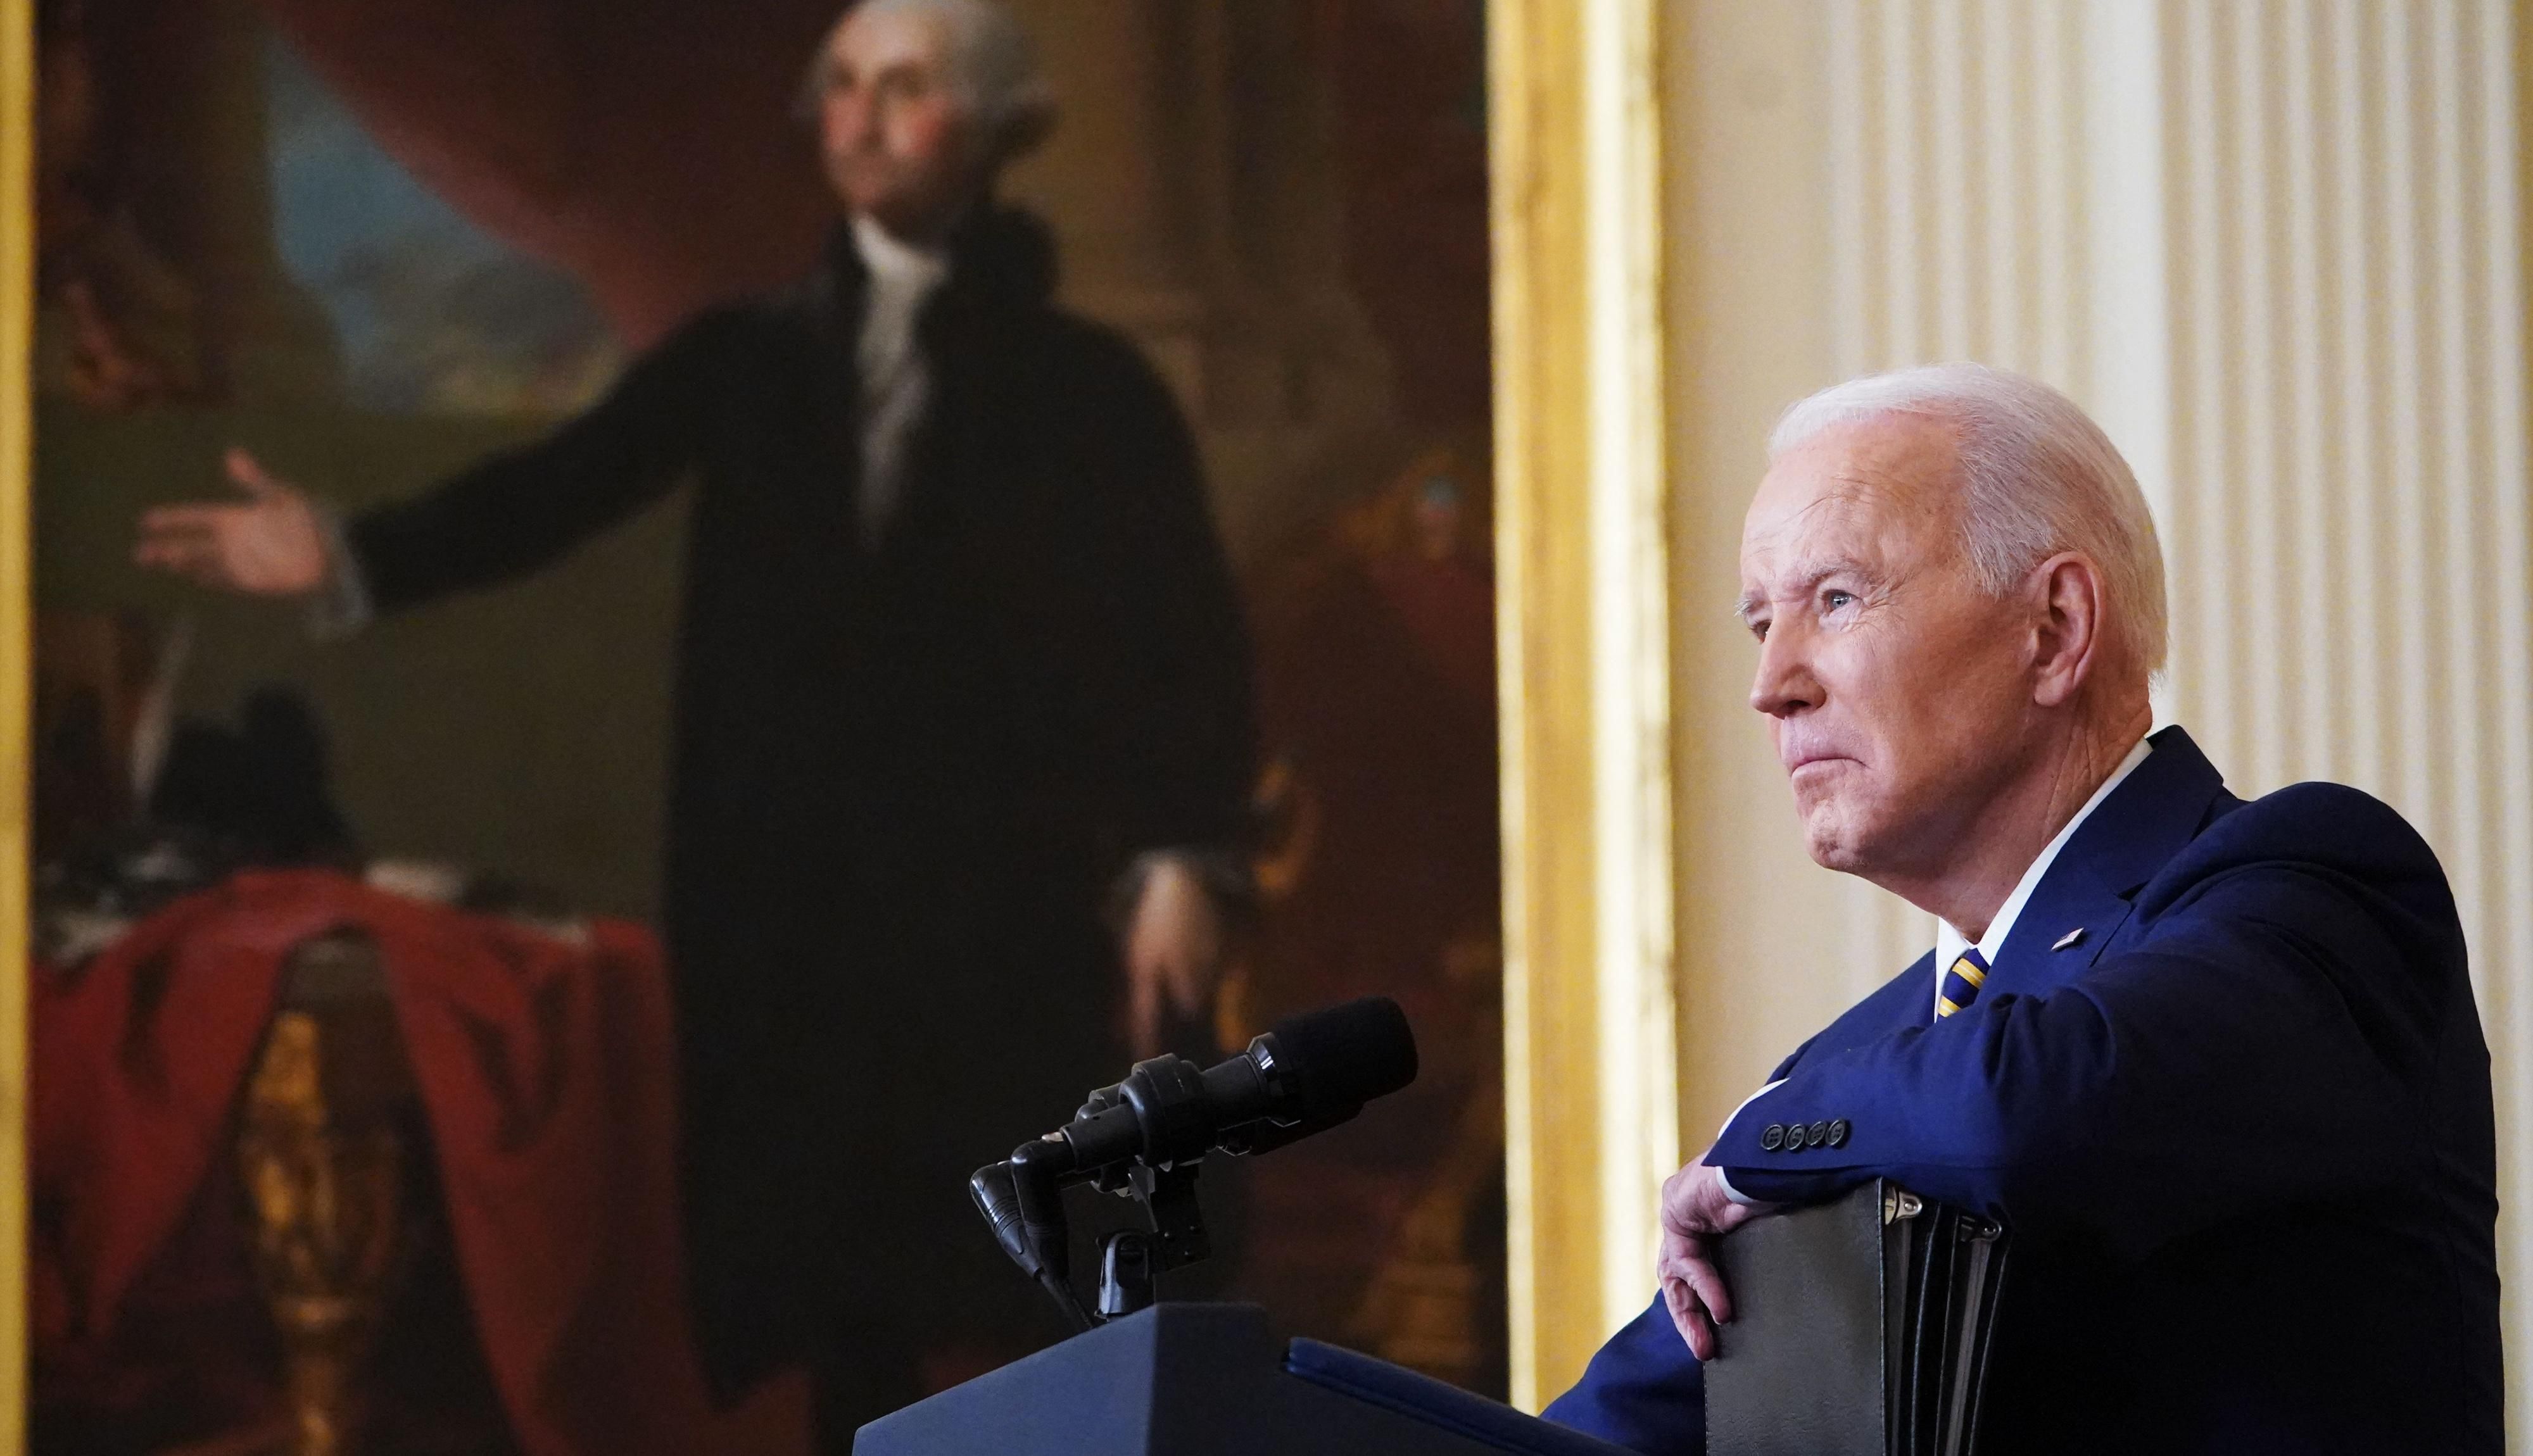 U.S. President Joe Biden listens to a question from a reporter during a press conference